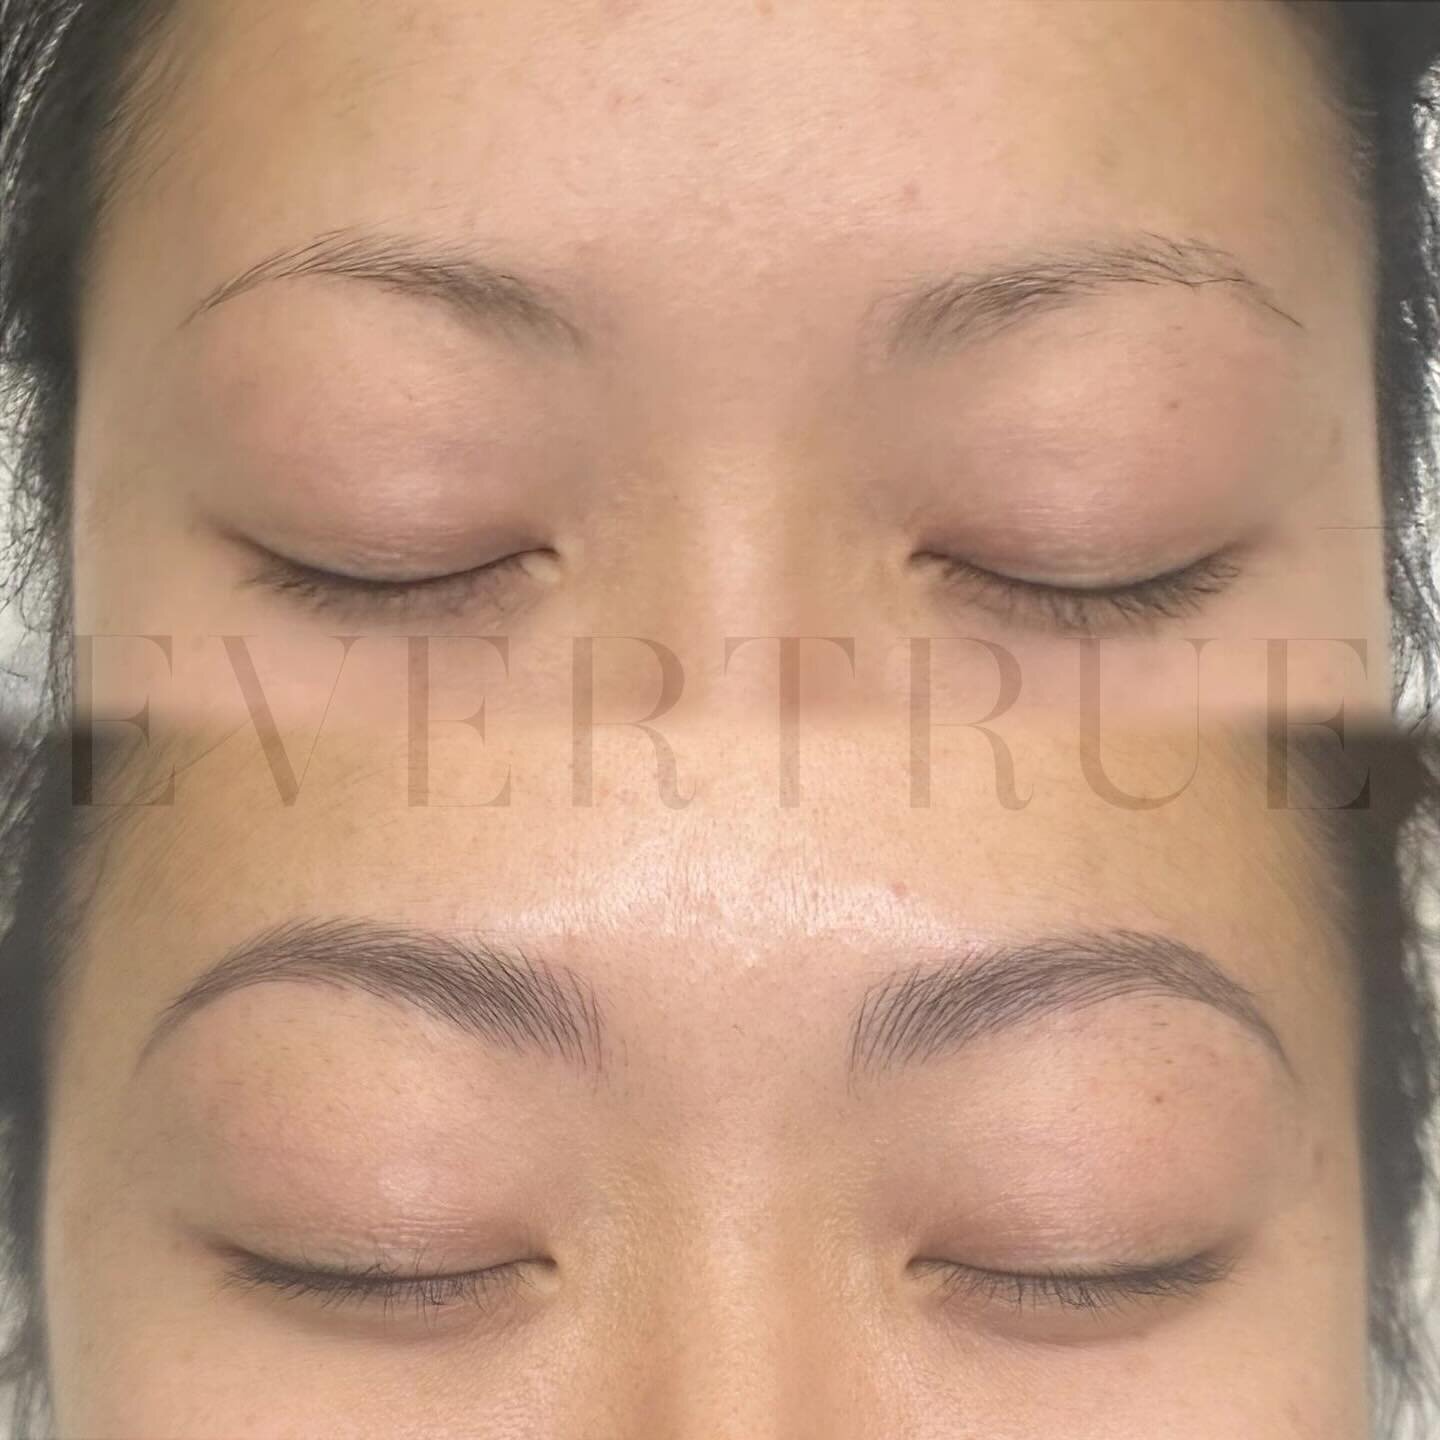 Whispy and light as a feather. Microblading created with a delicate touch, for an extra-natural look. 
.
Bespoke Brows Microblading by Kelly (Specialist, NYC)
.
#microblading #bespokebrows #eyebrowmicroblading #eyebrowmicropigmentation #browartist #b